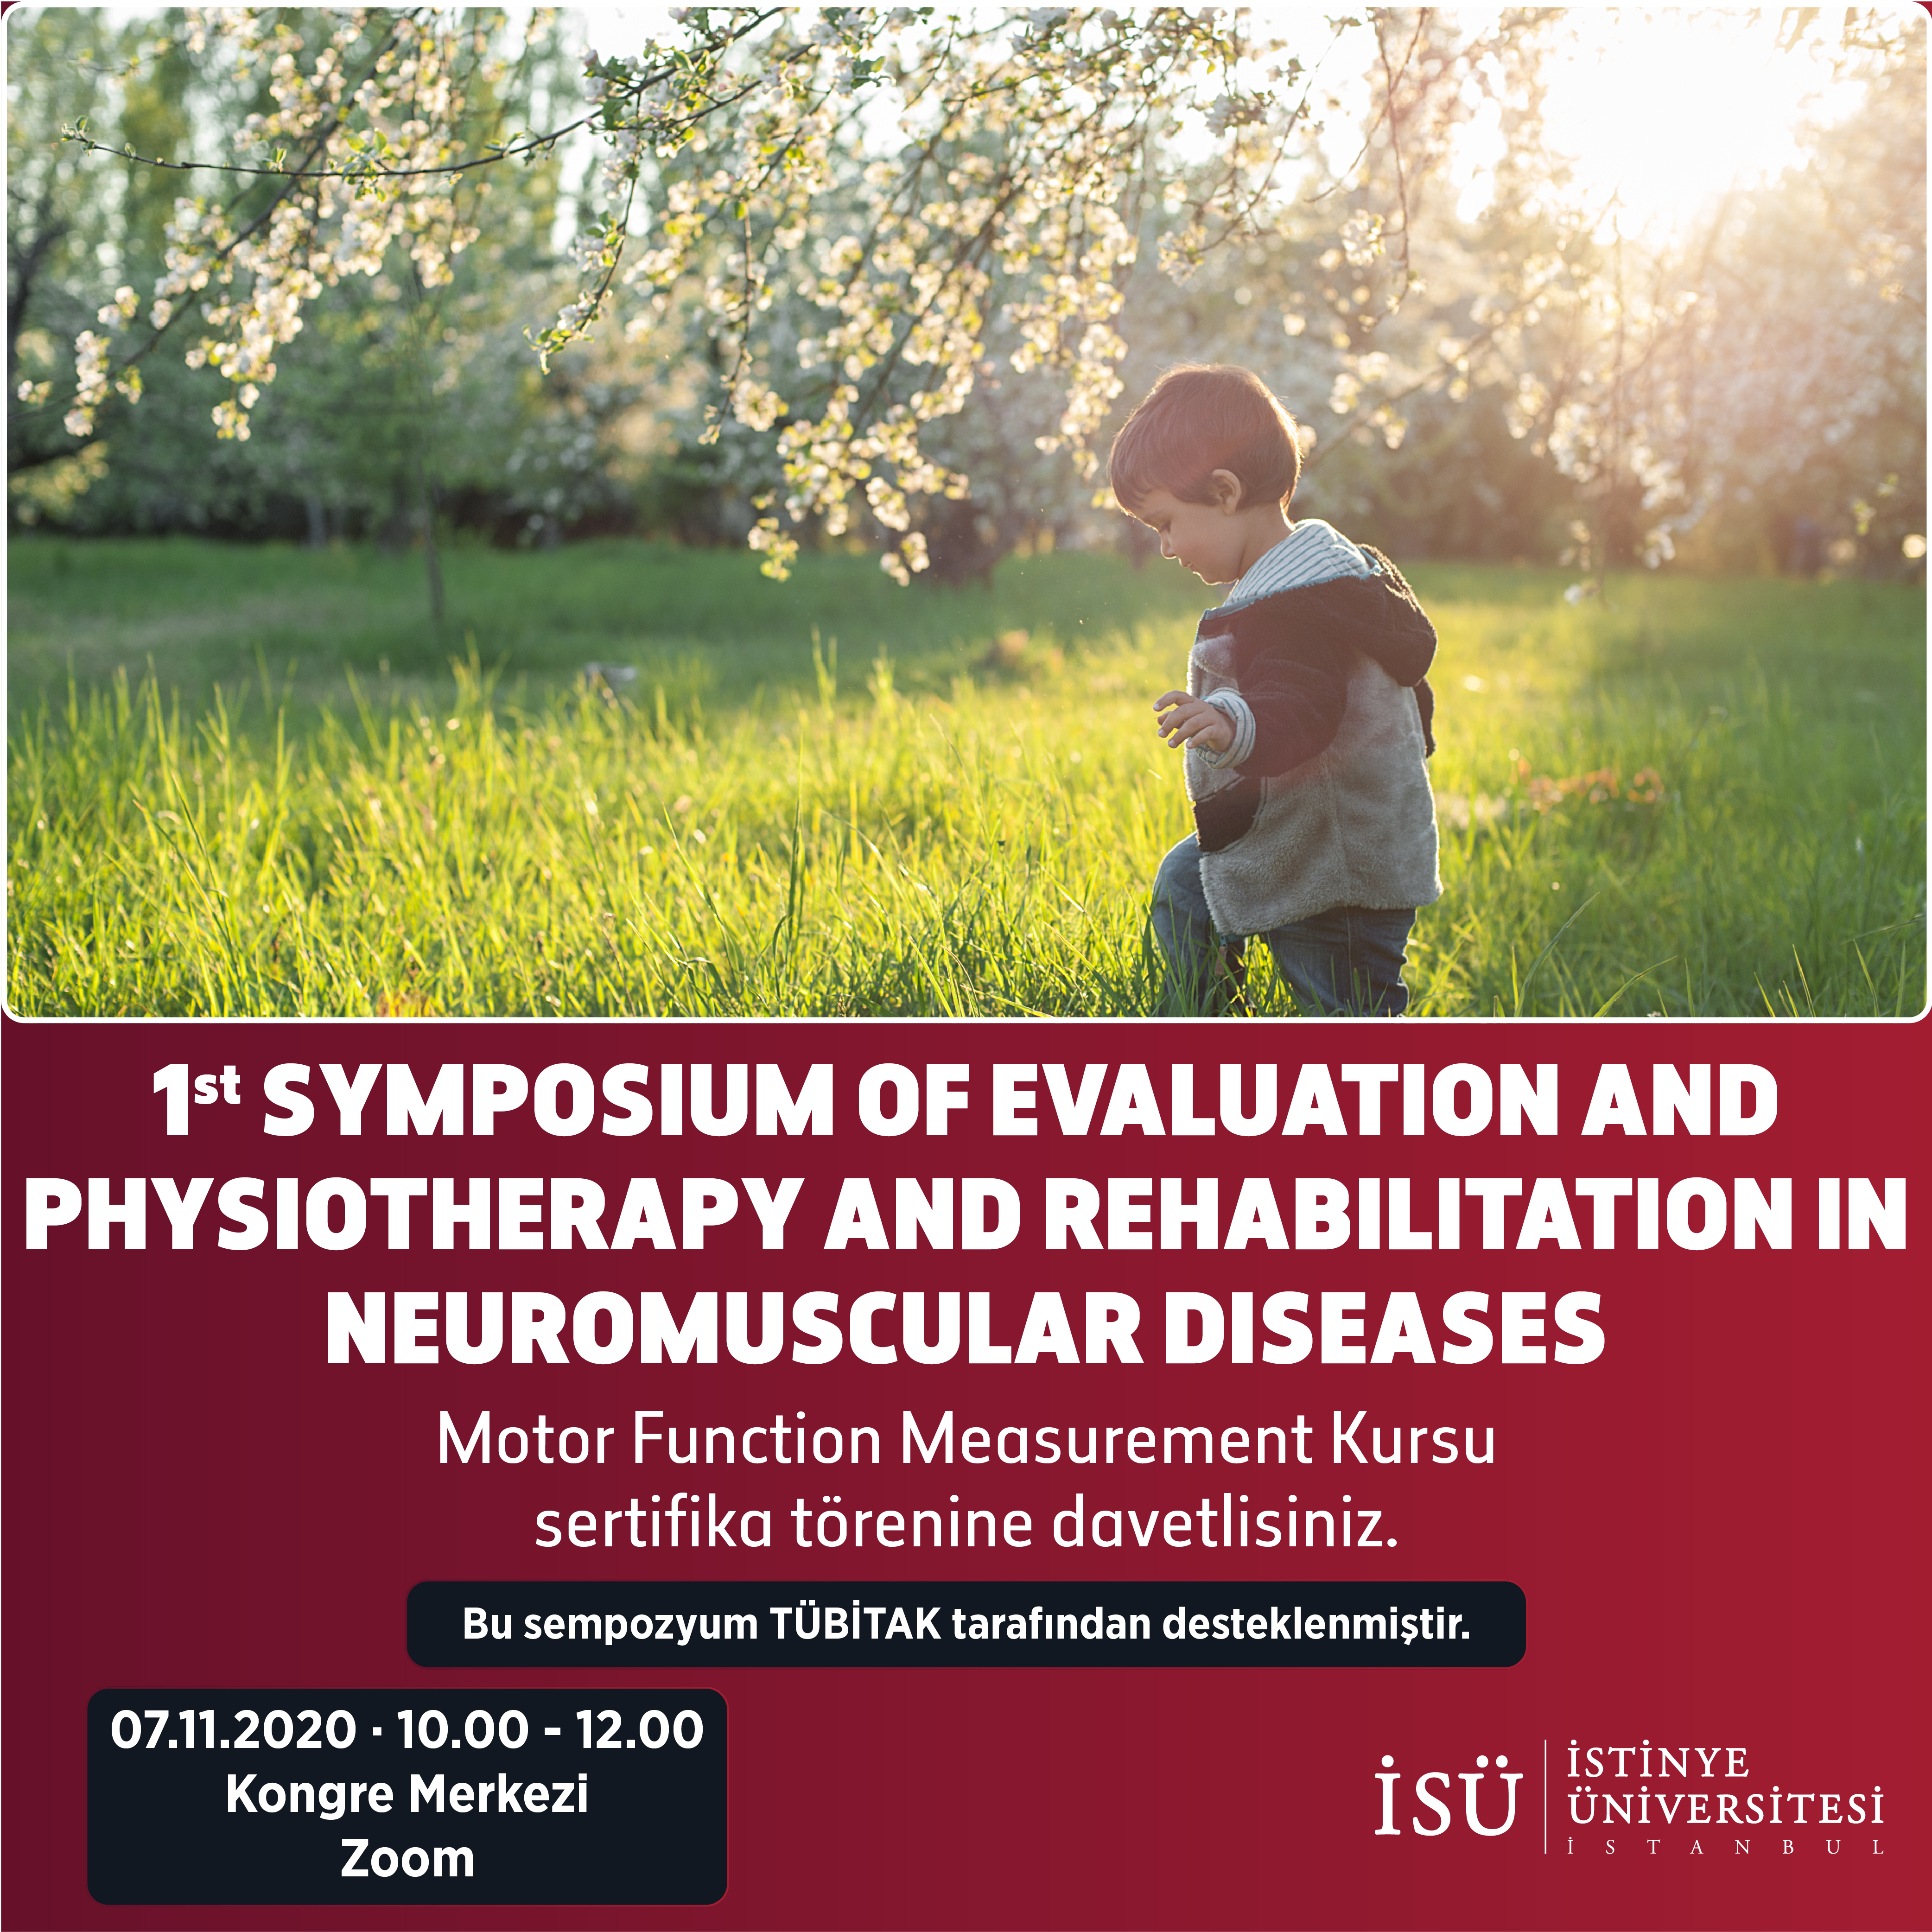 1st Symposium of Evaluation And Physiotherapy and Rehabilitation in Neuromuscular Diseases